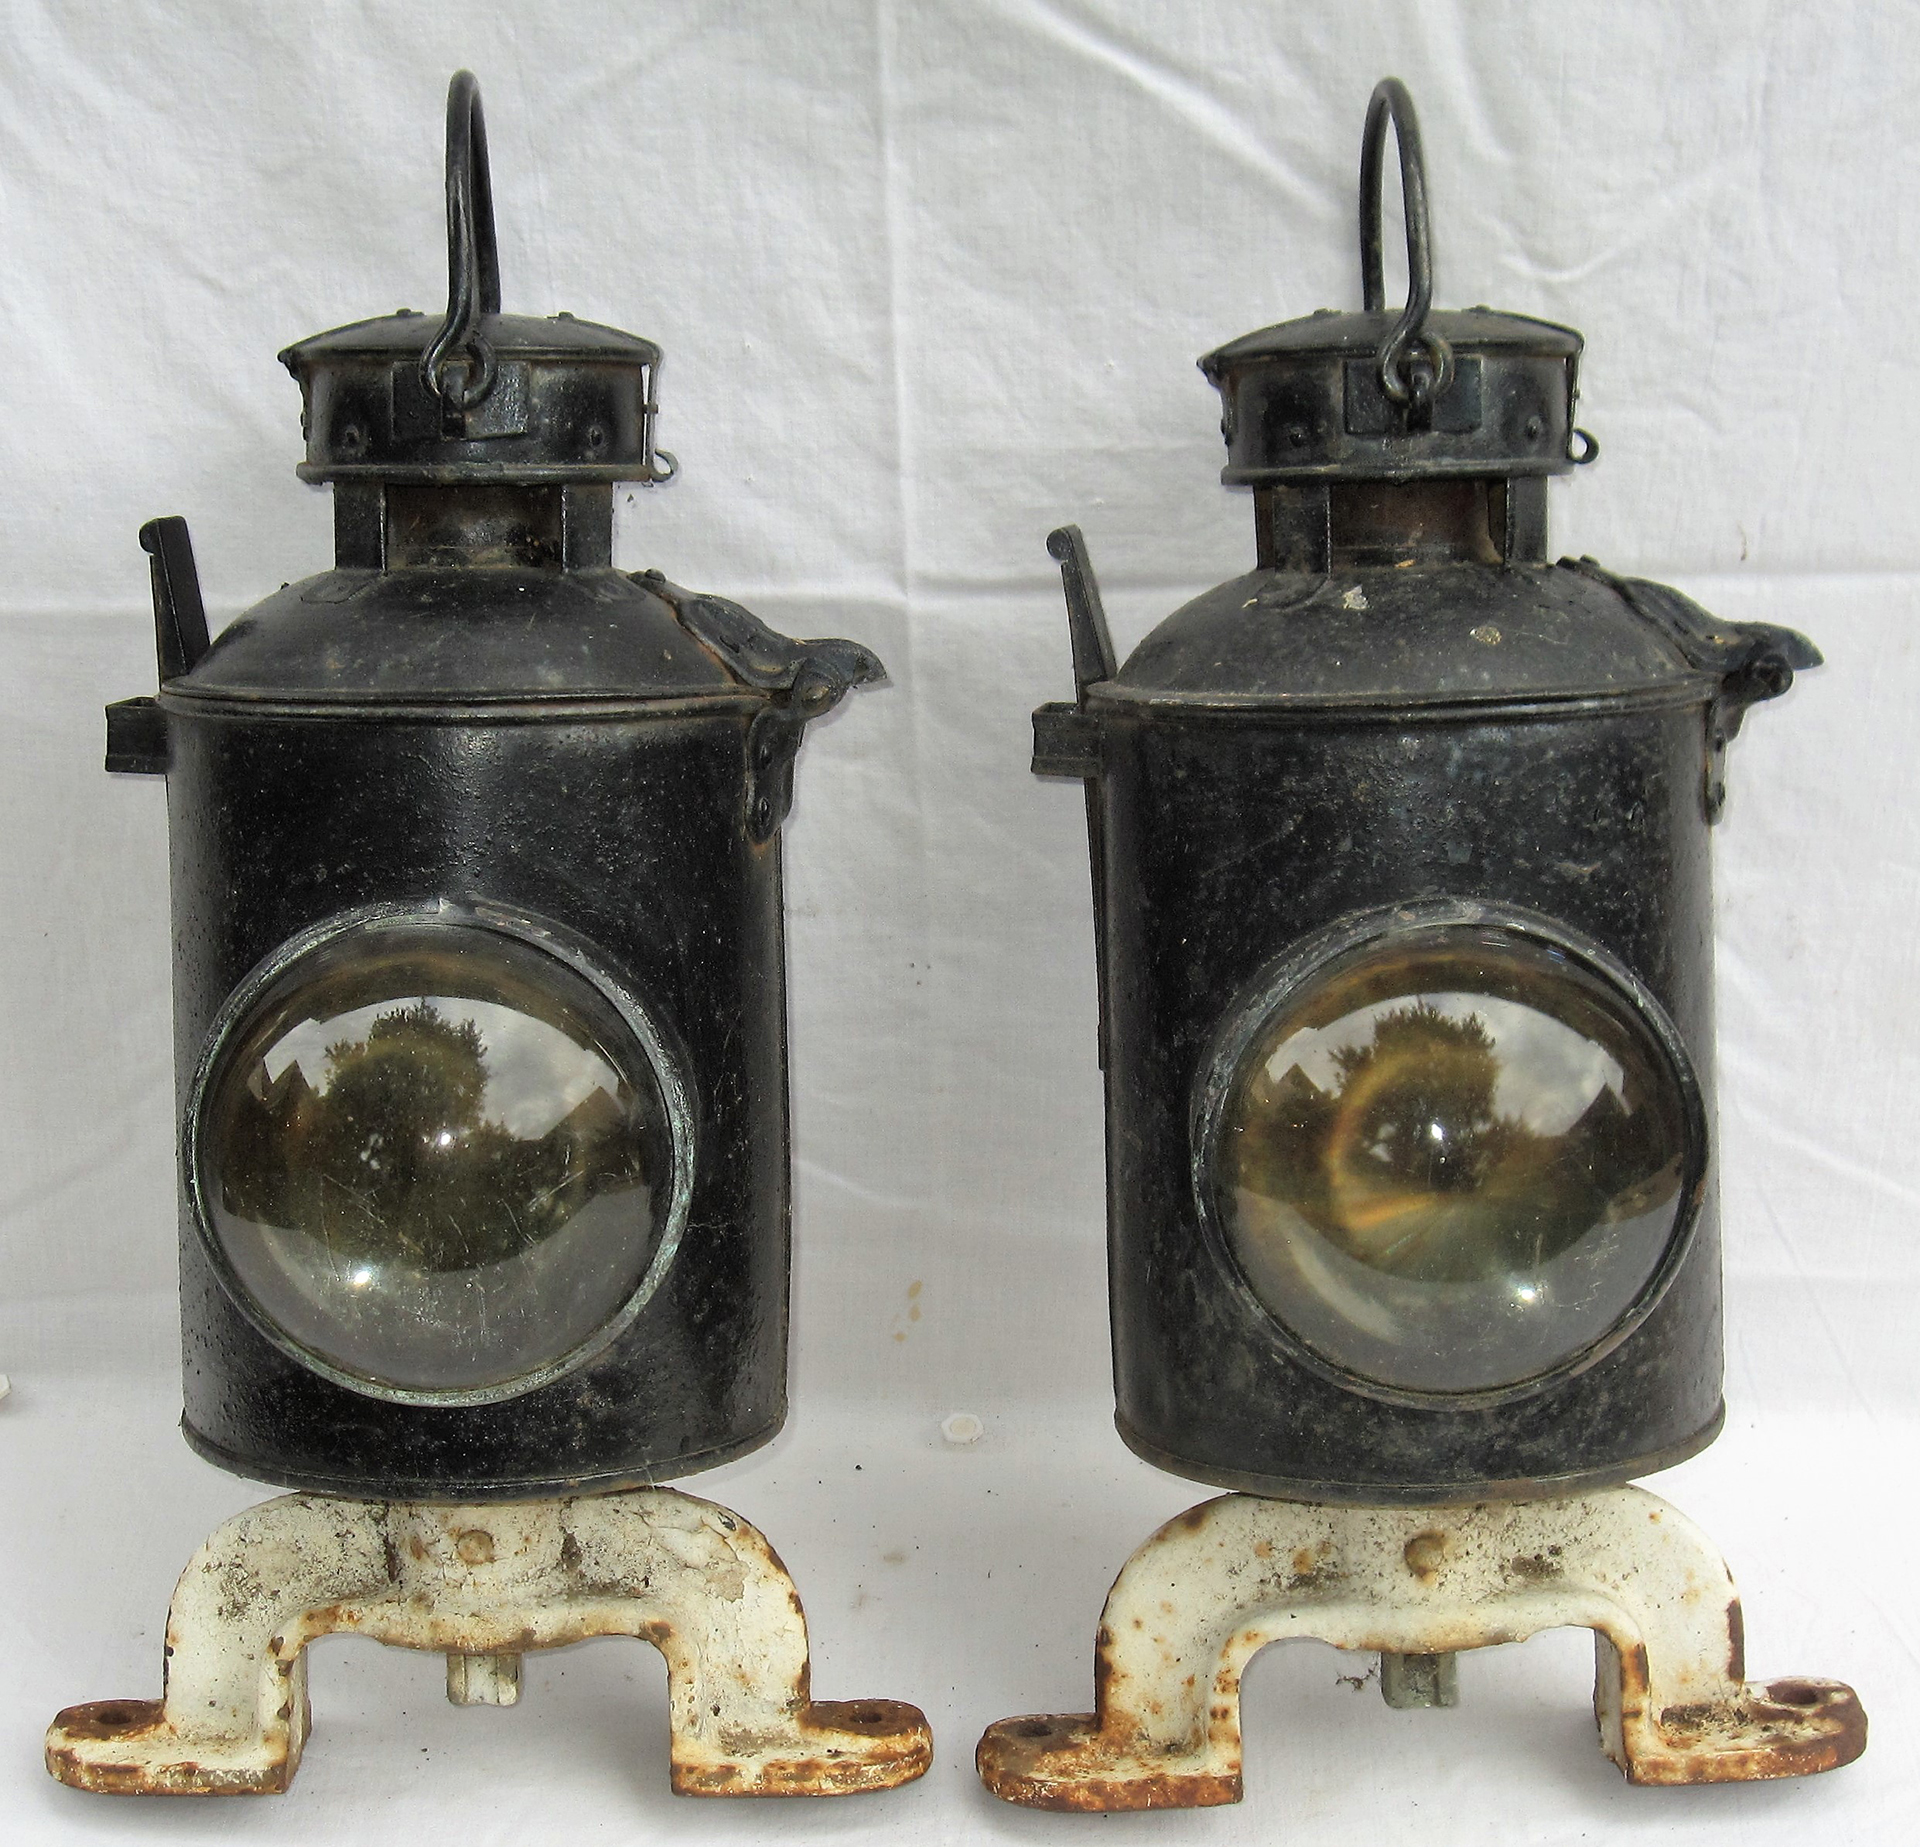 A pair of matching GWR/BR(W) Gate lamps mounted onto original brackets. No interiors.